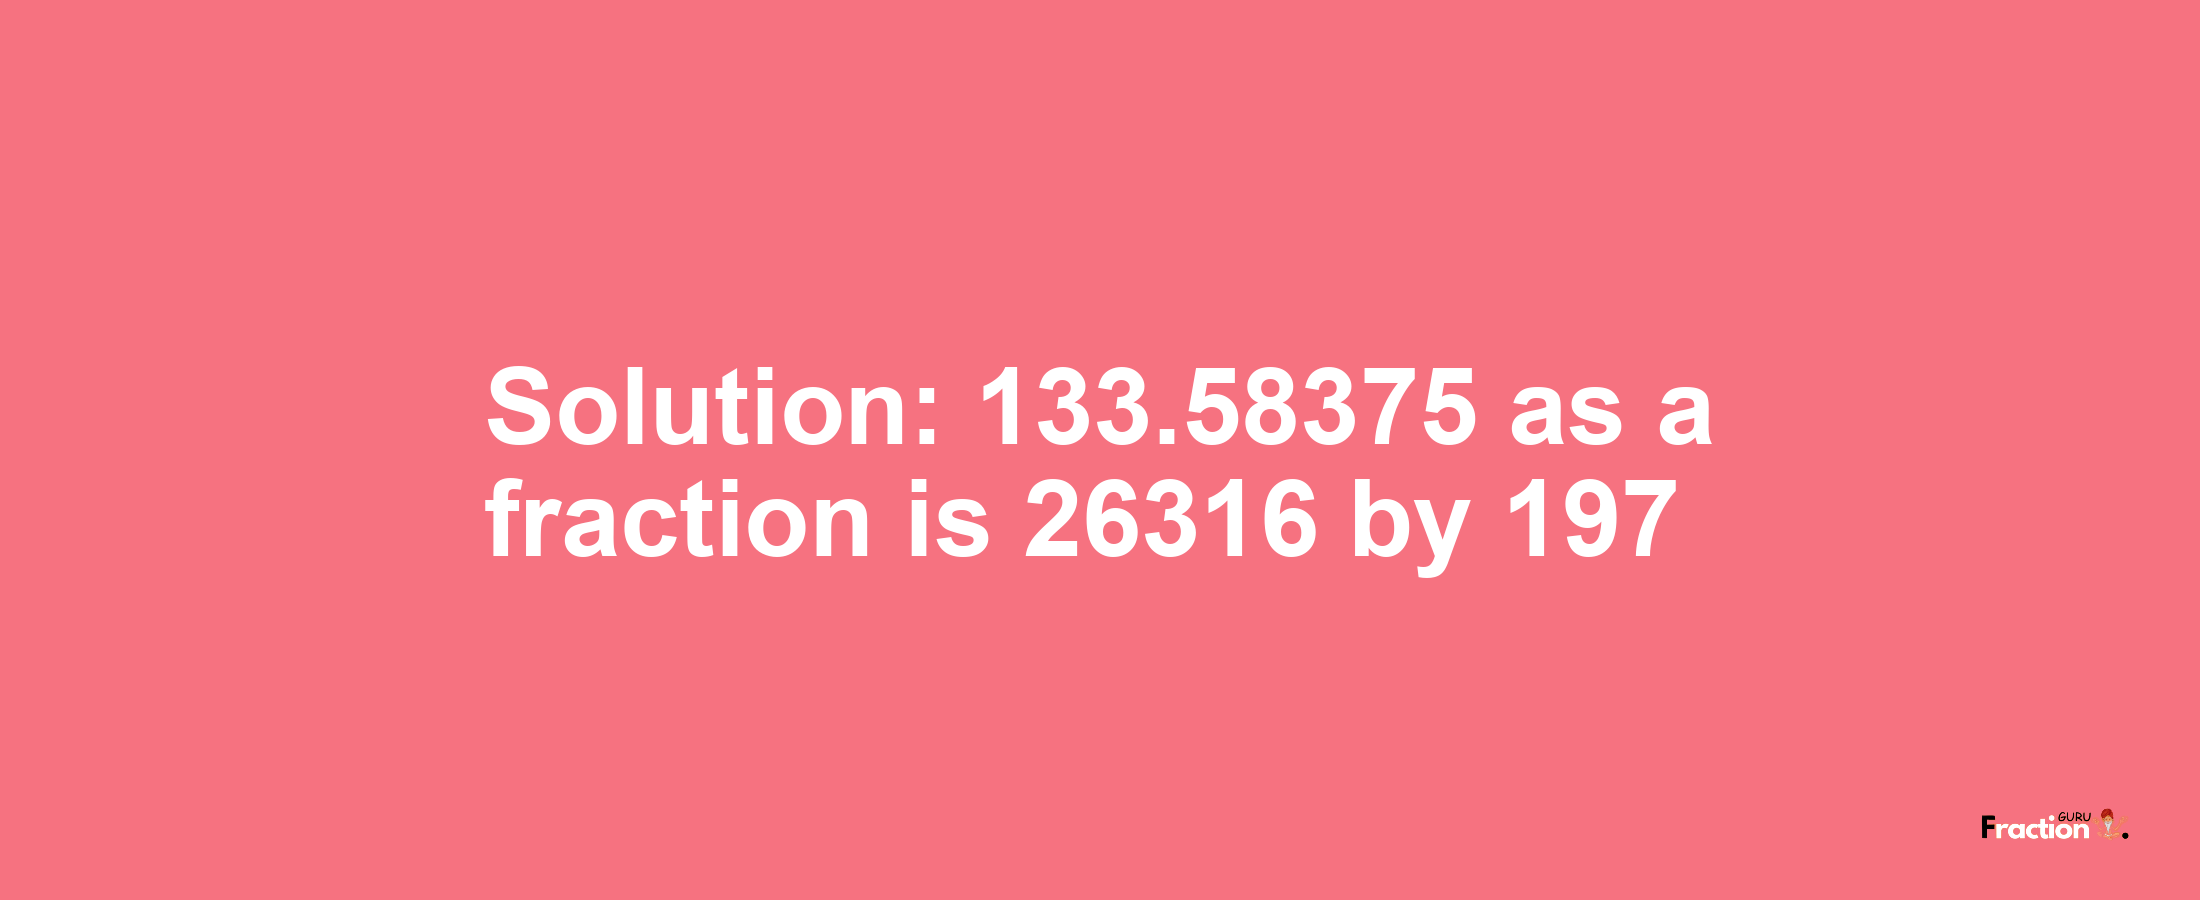 Solution:133.58375 as a fraction is 26316/197